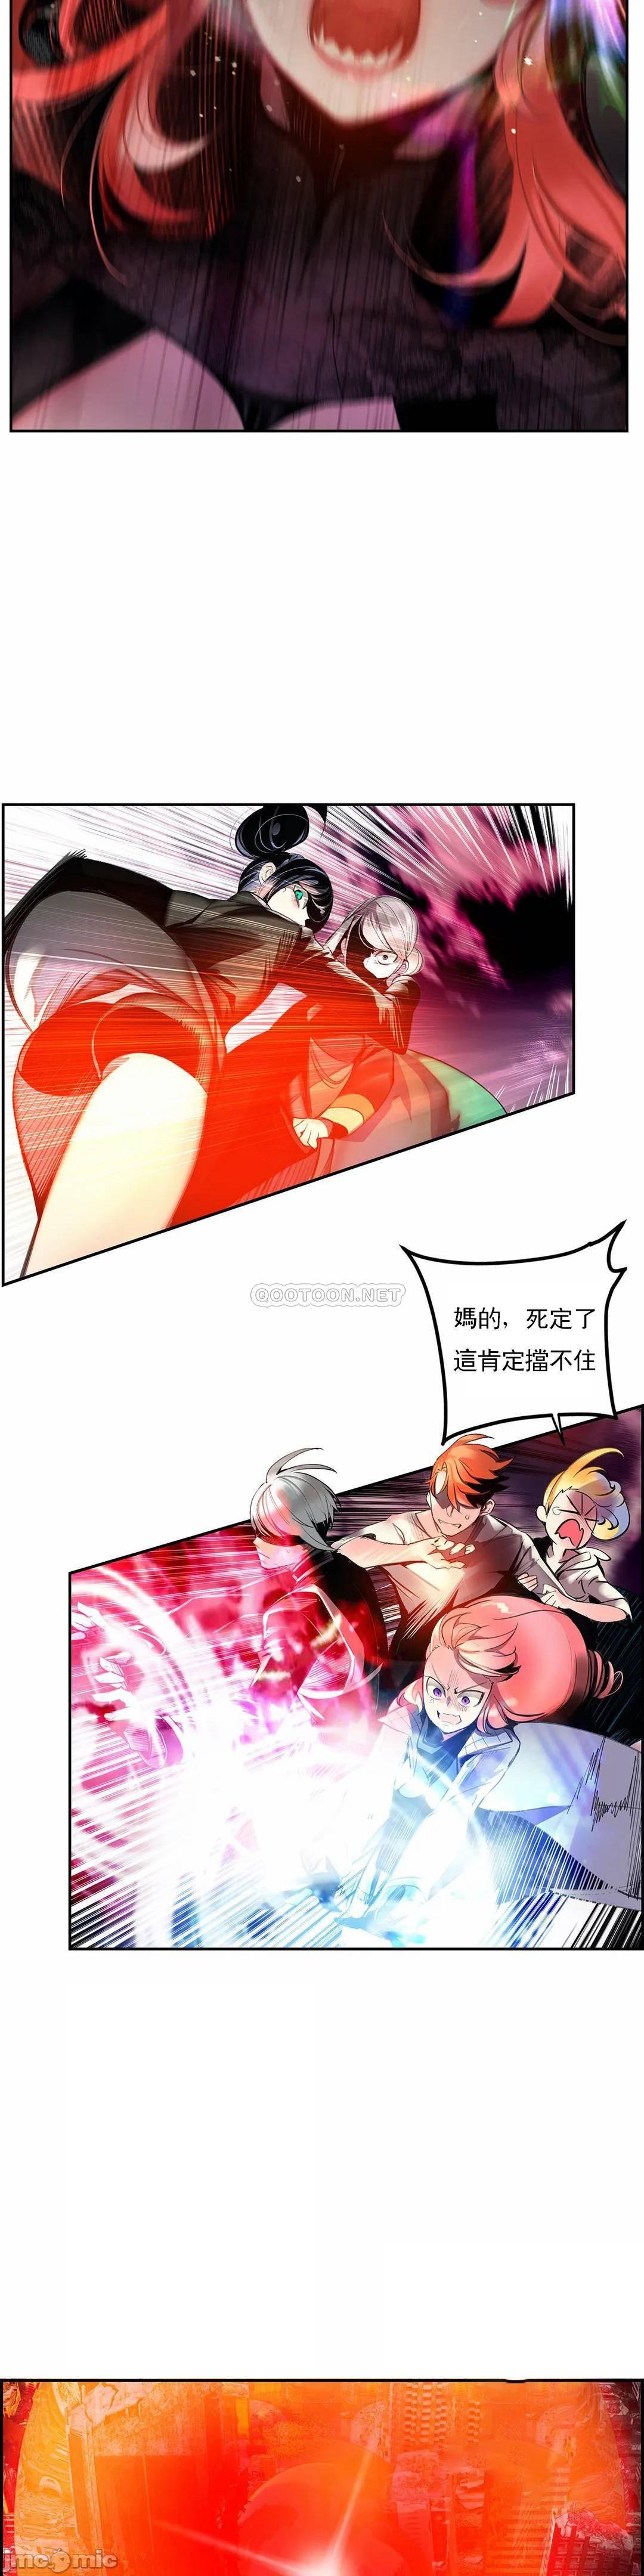 [Juder] Lilith`s Cord (第二季) Ch.77-93 end [Chinese] 343